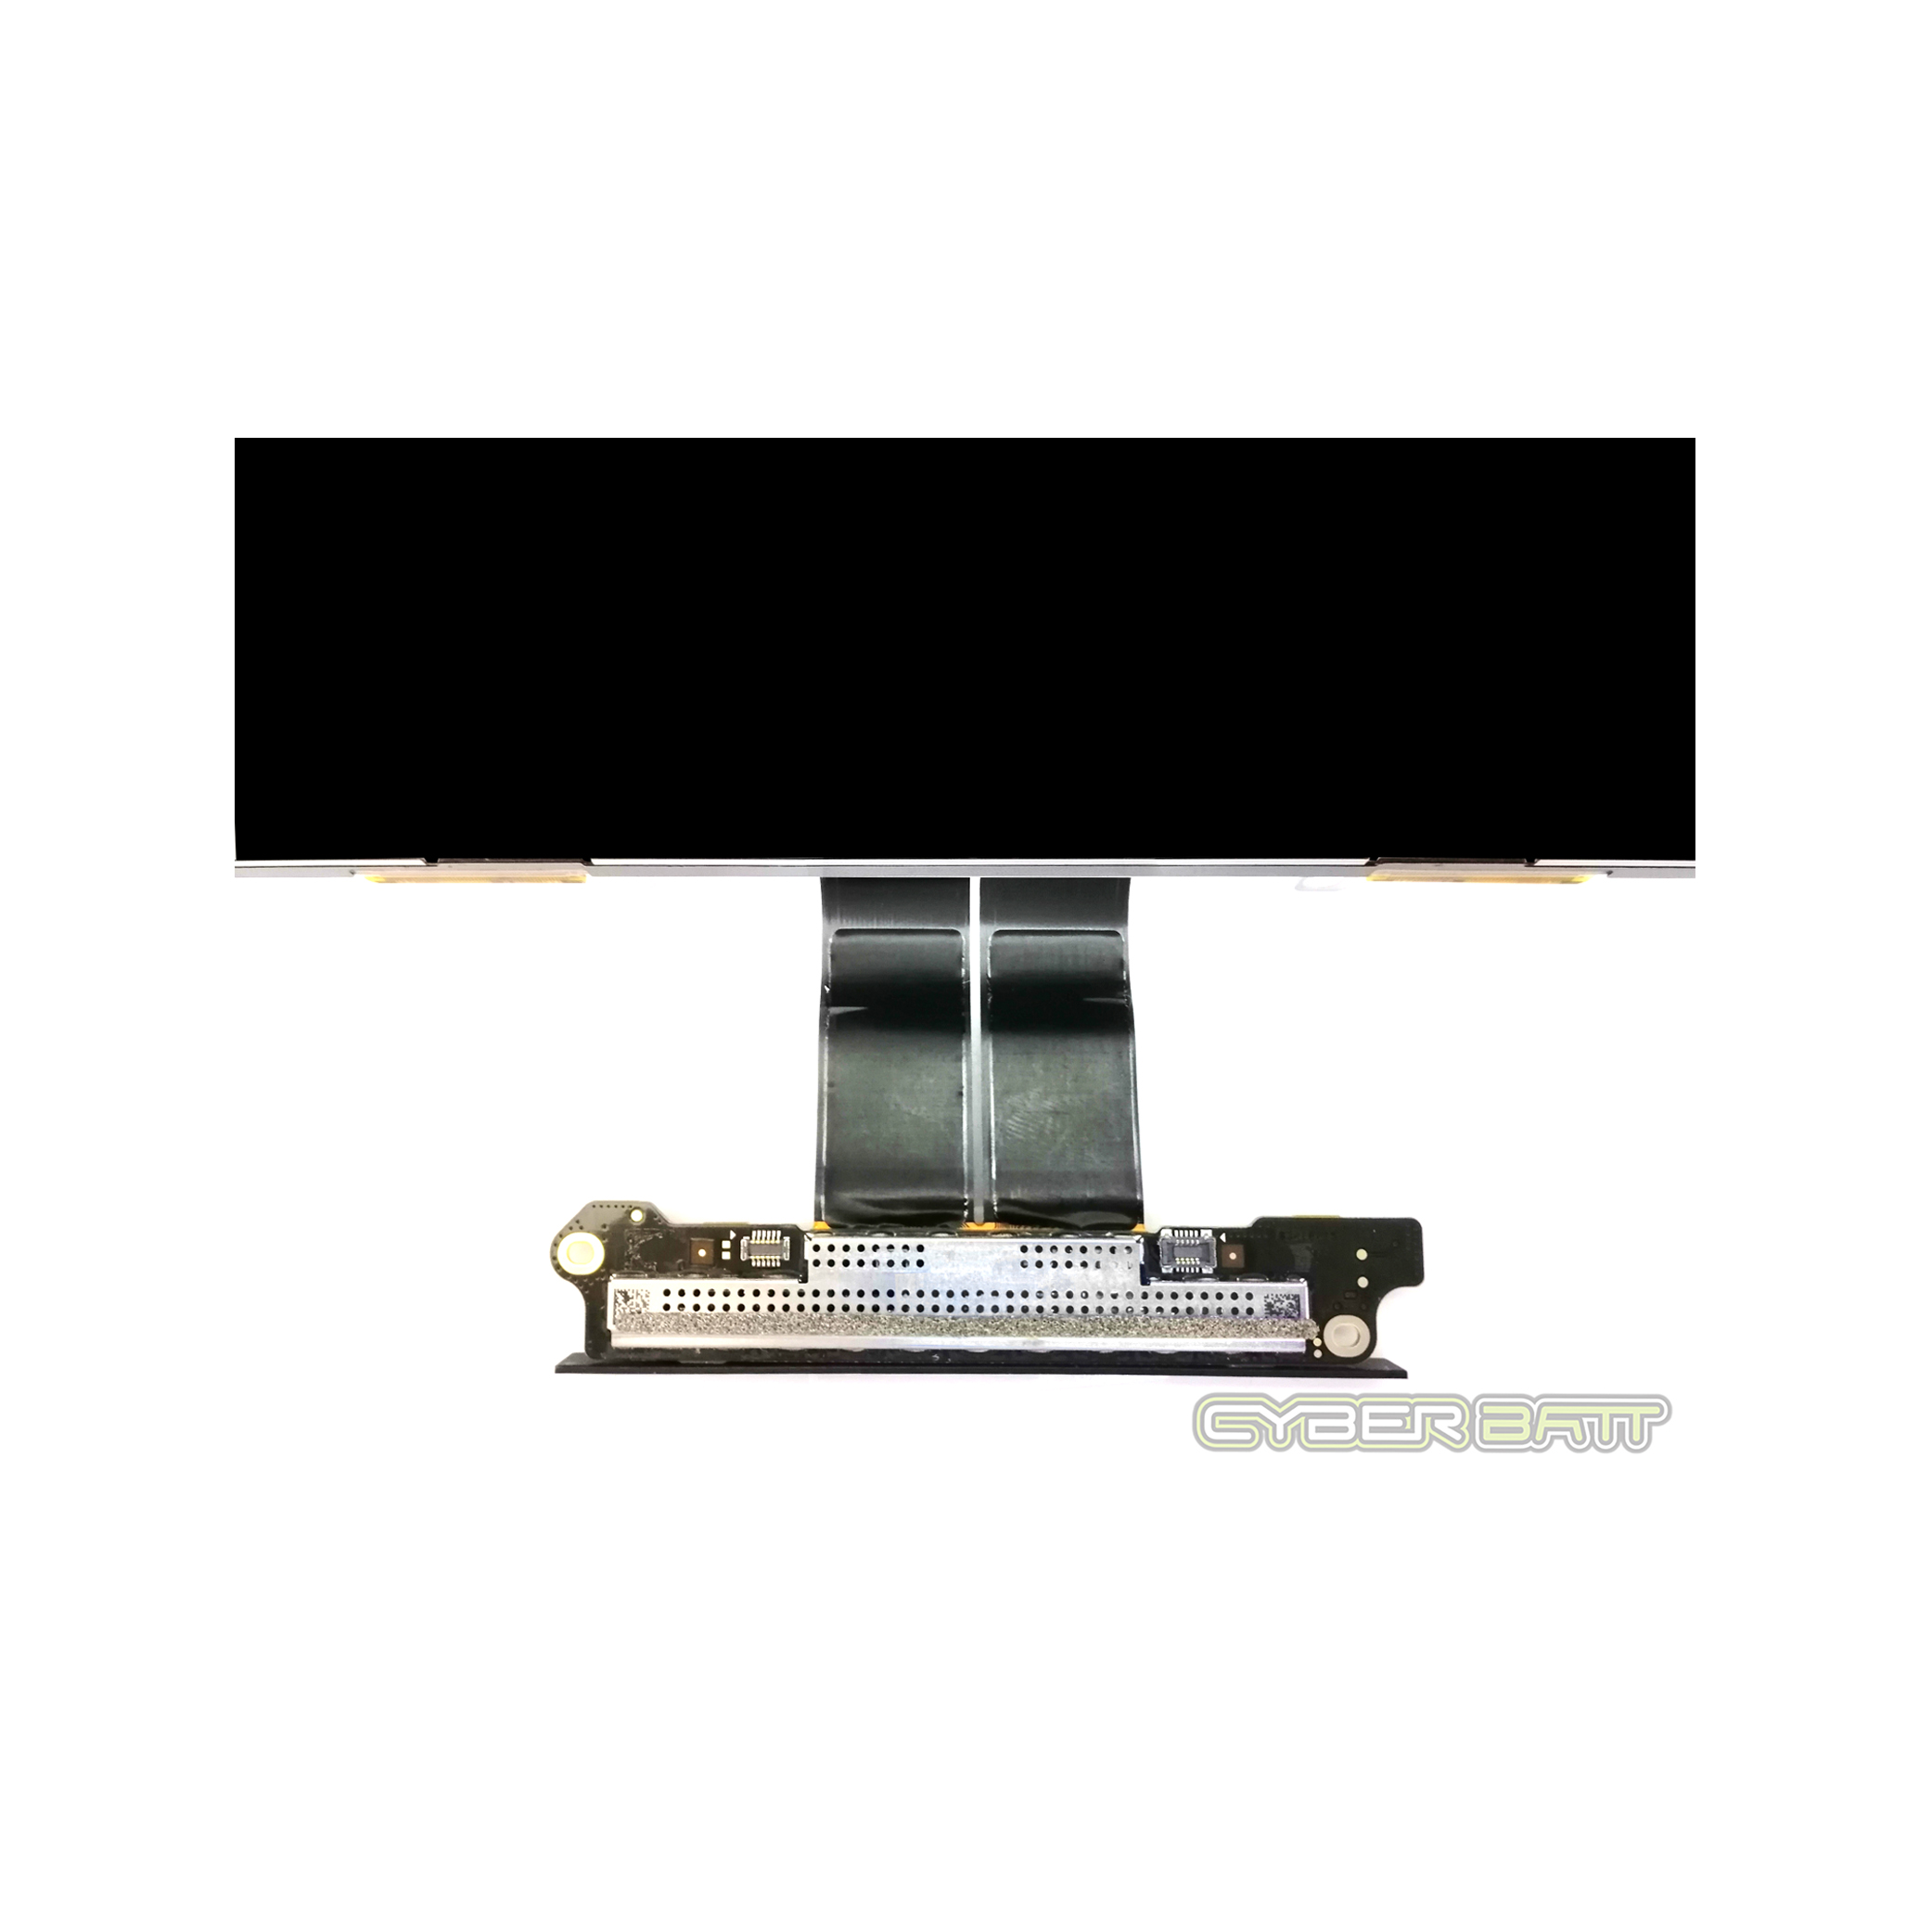 Screen Panel Macbook Retina 12 inch A1534  (Early 2015 Early 2016) 2304X1440 MF865 MF865 LSN120DL01-A01 No Case